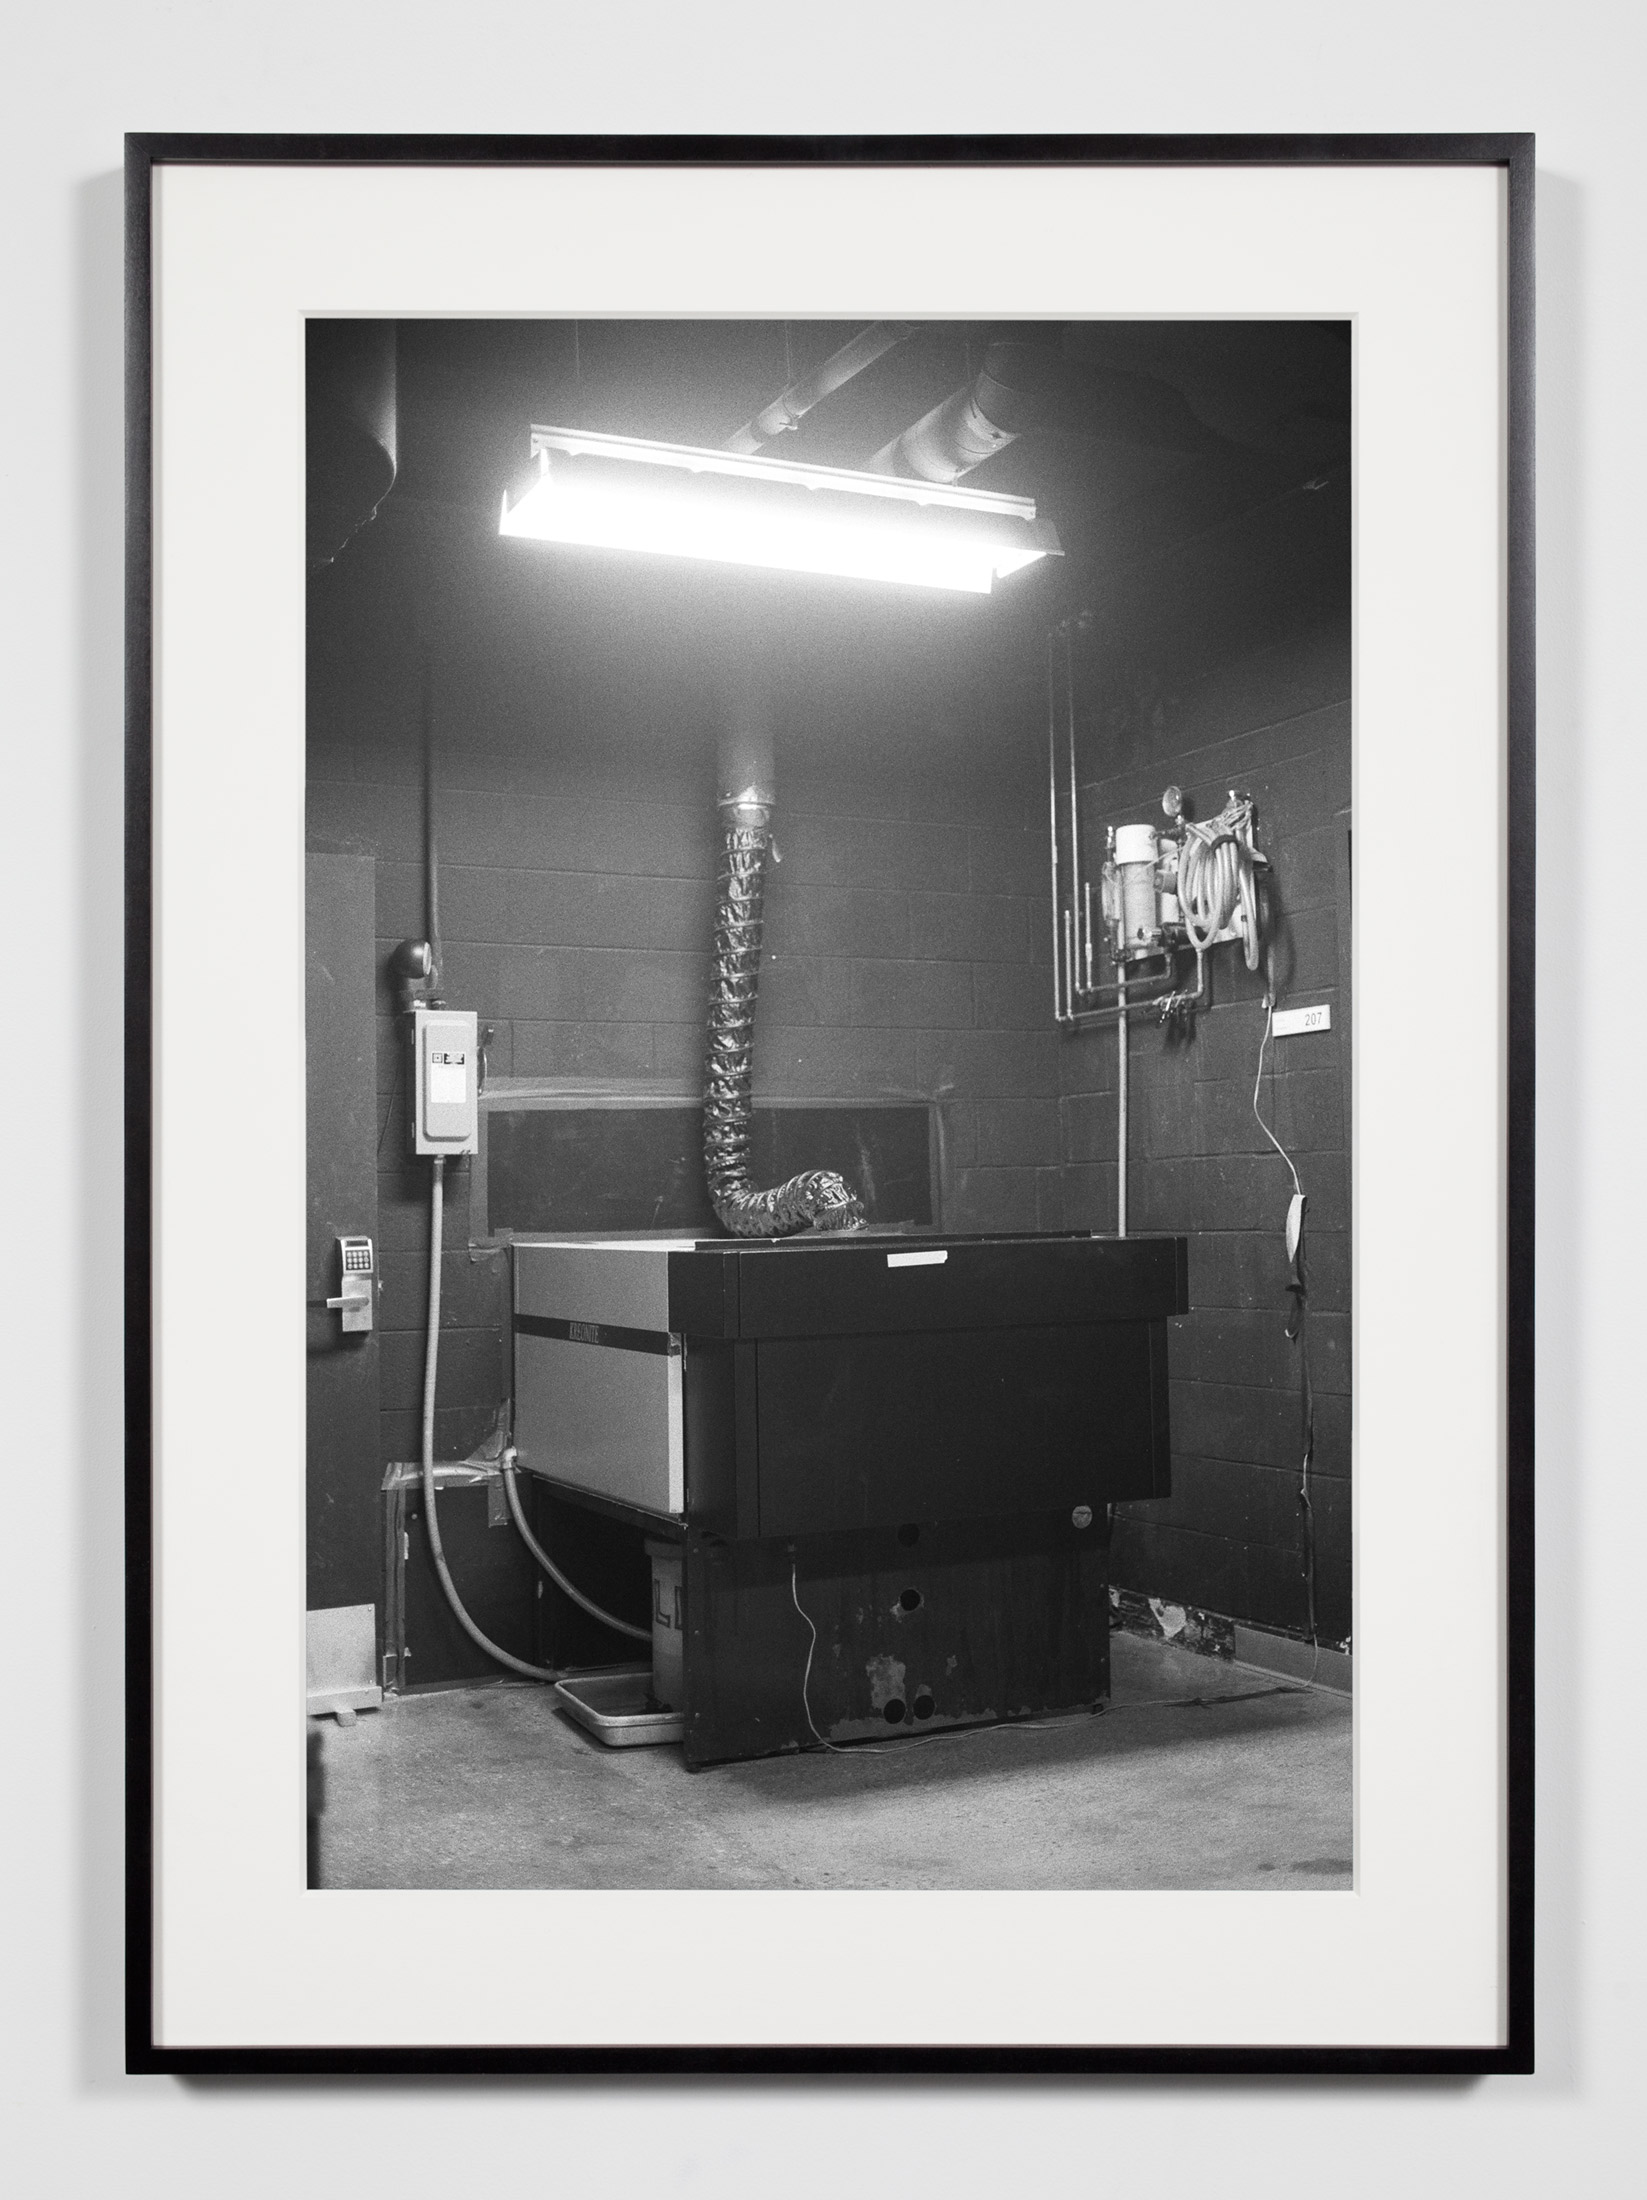   College Darkroom, Color Photographic Processor, Chicago, Illinois, August 21, 2008   2011  Epson Ultrachrome K3 archival ink jet print on Hahnemühle Photo Rag paper  36 3/8 x 26 3/8 inches   Industrial Portraits, 2008–    A Diagram of Forces, 2011 